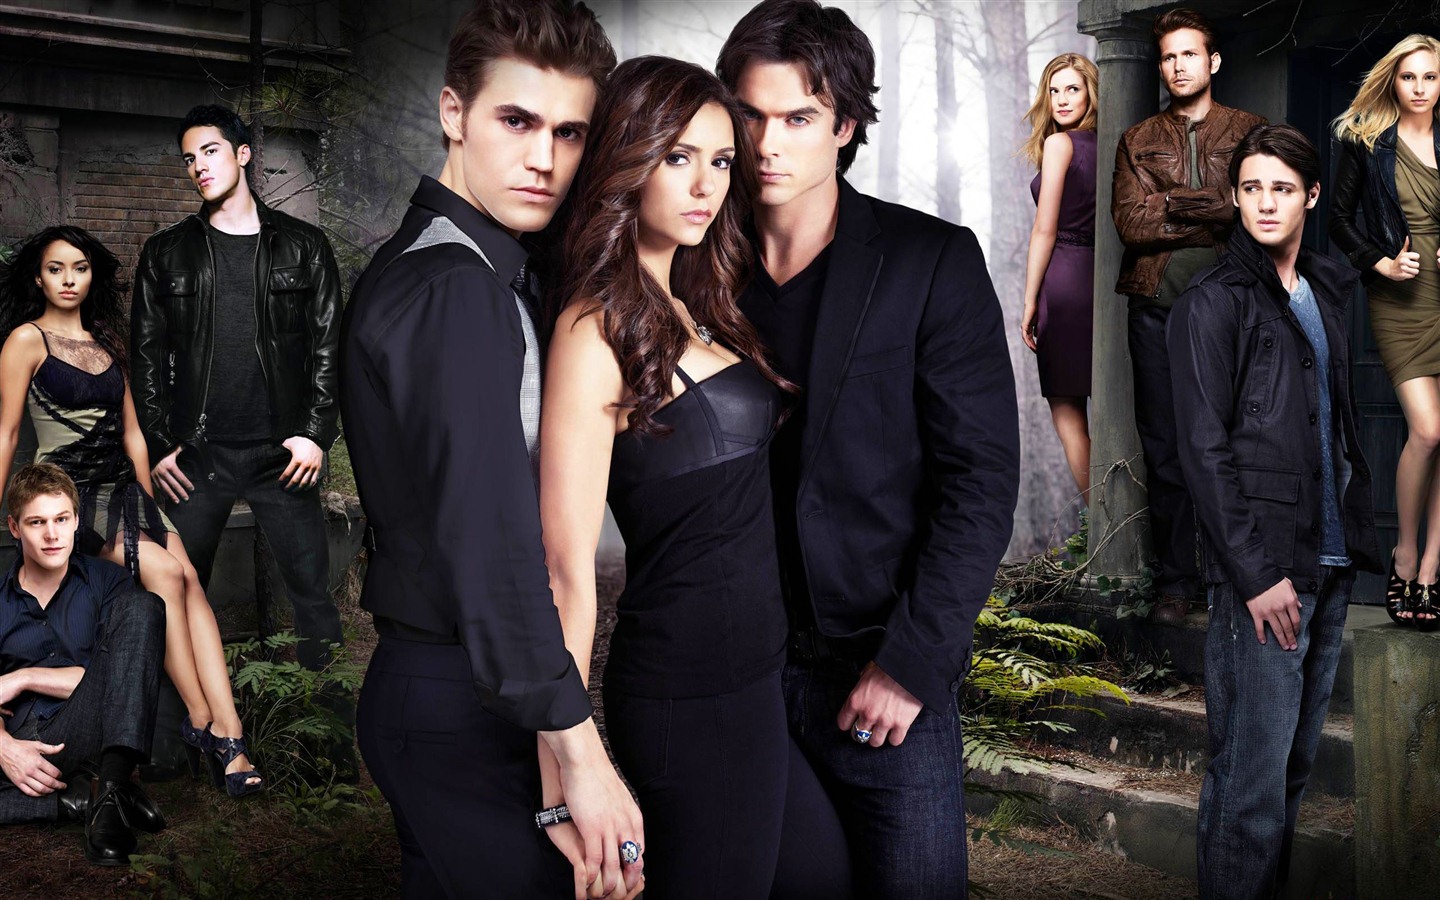 The Vampire Diaries wallpapers HD #12 - 1440x900